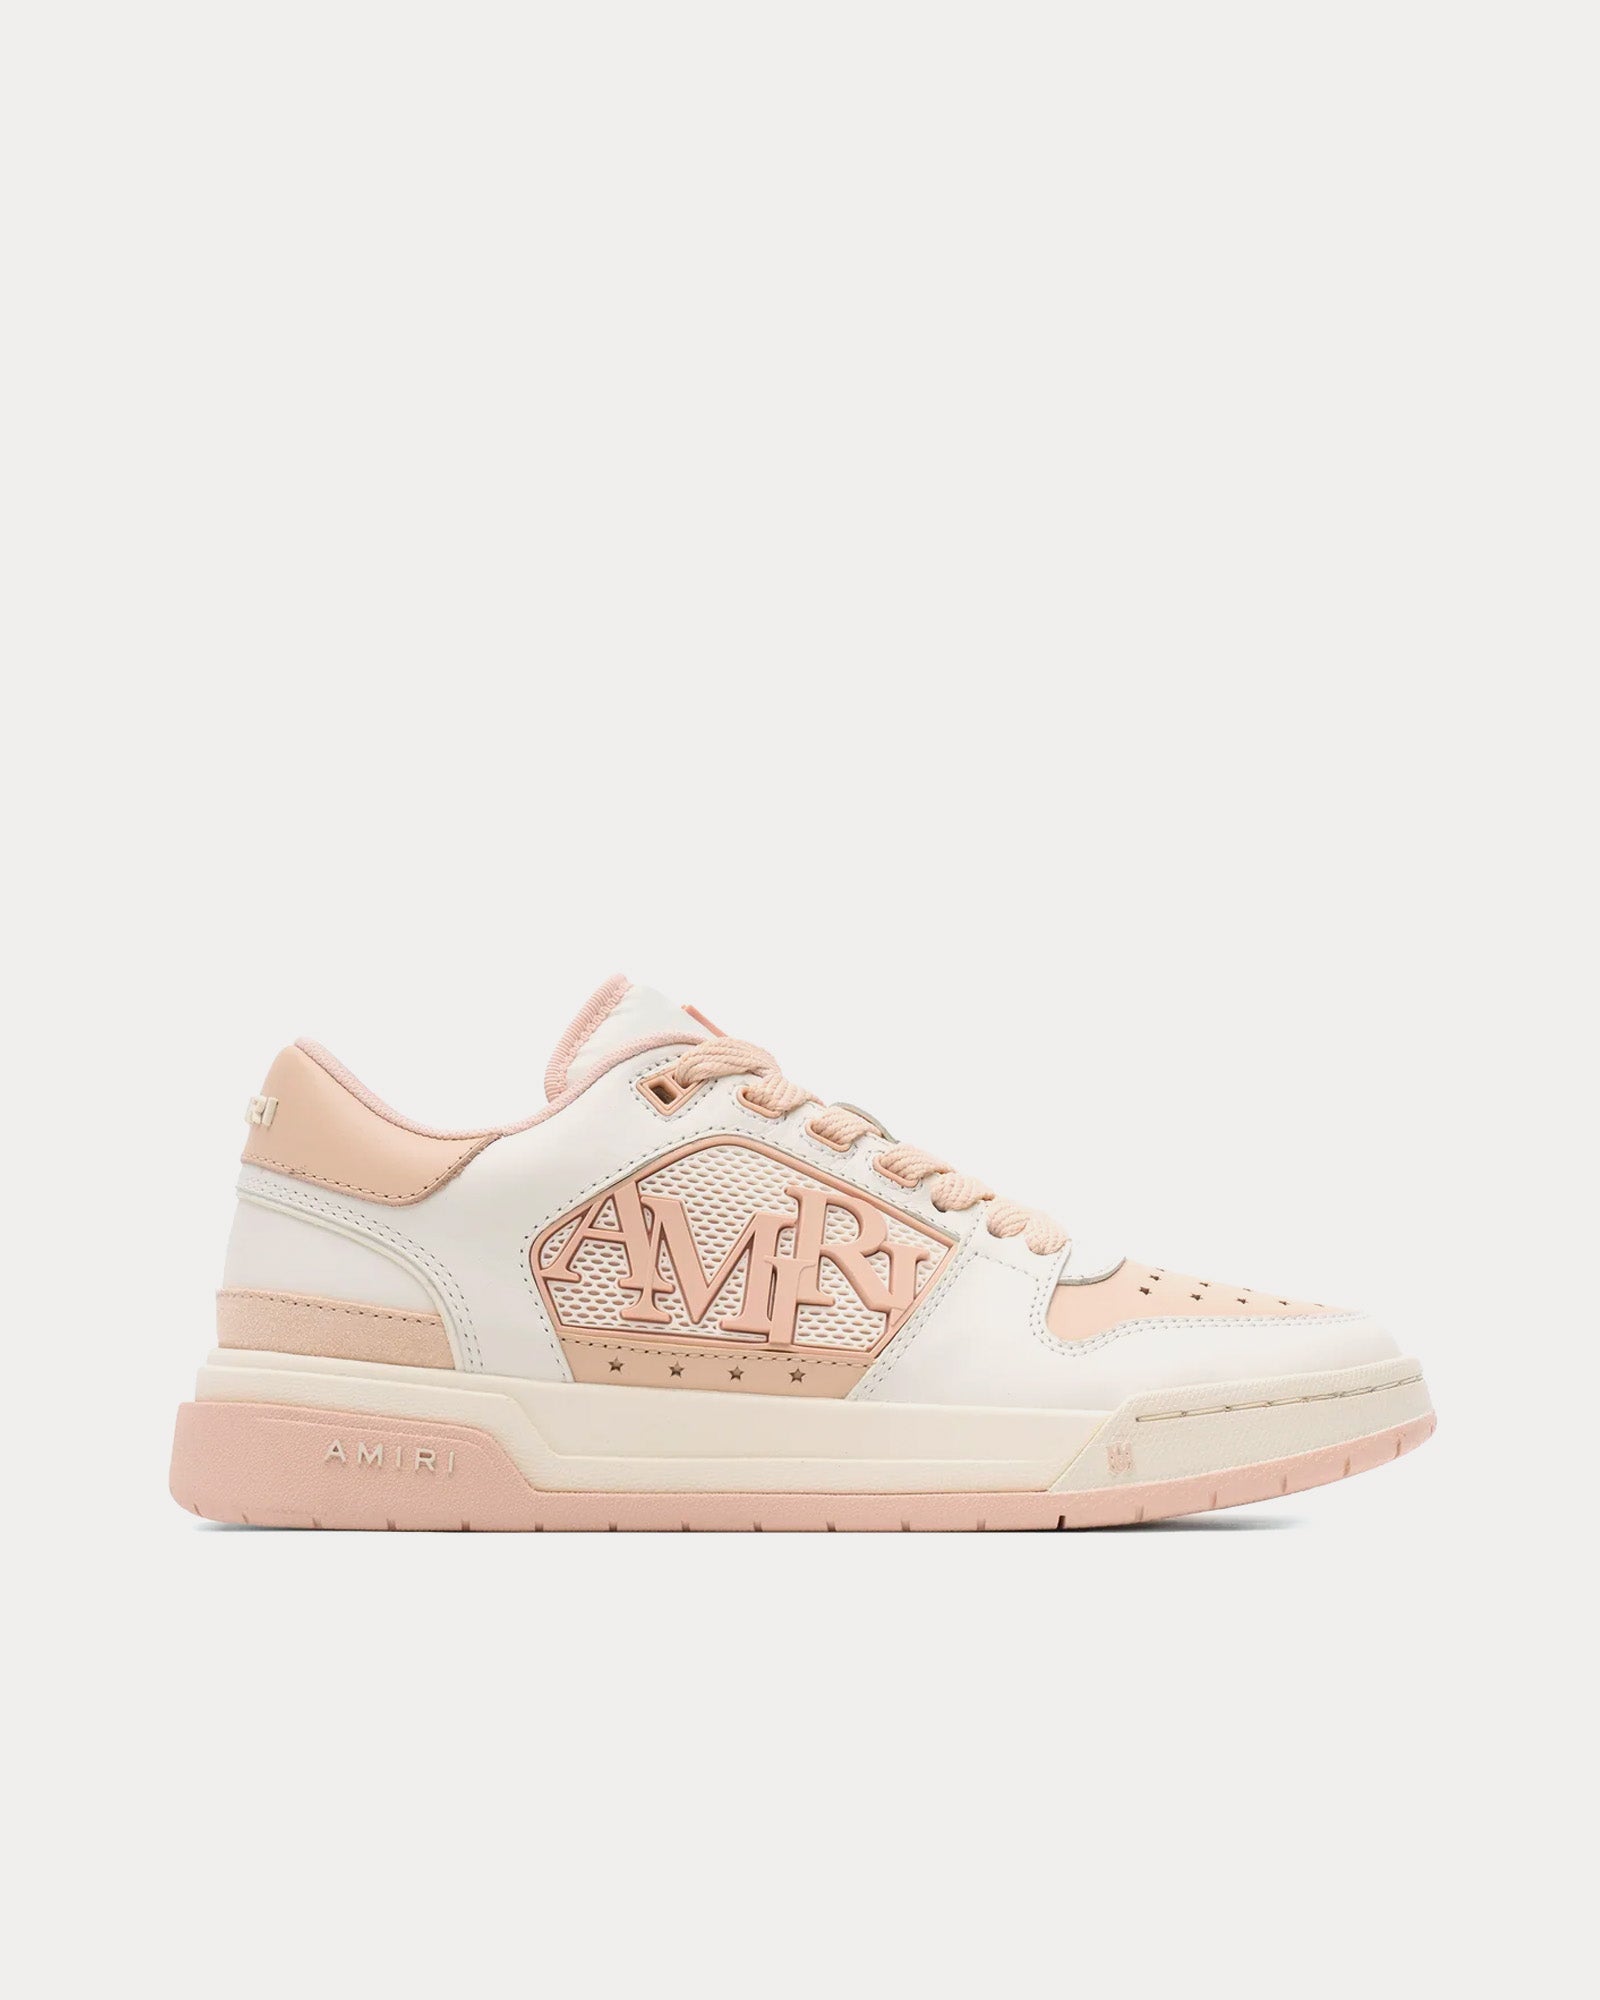 AMIRI - Classic White / Pink Low Top Sneakers